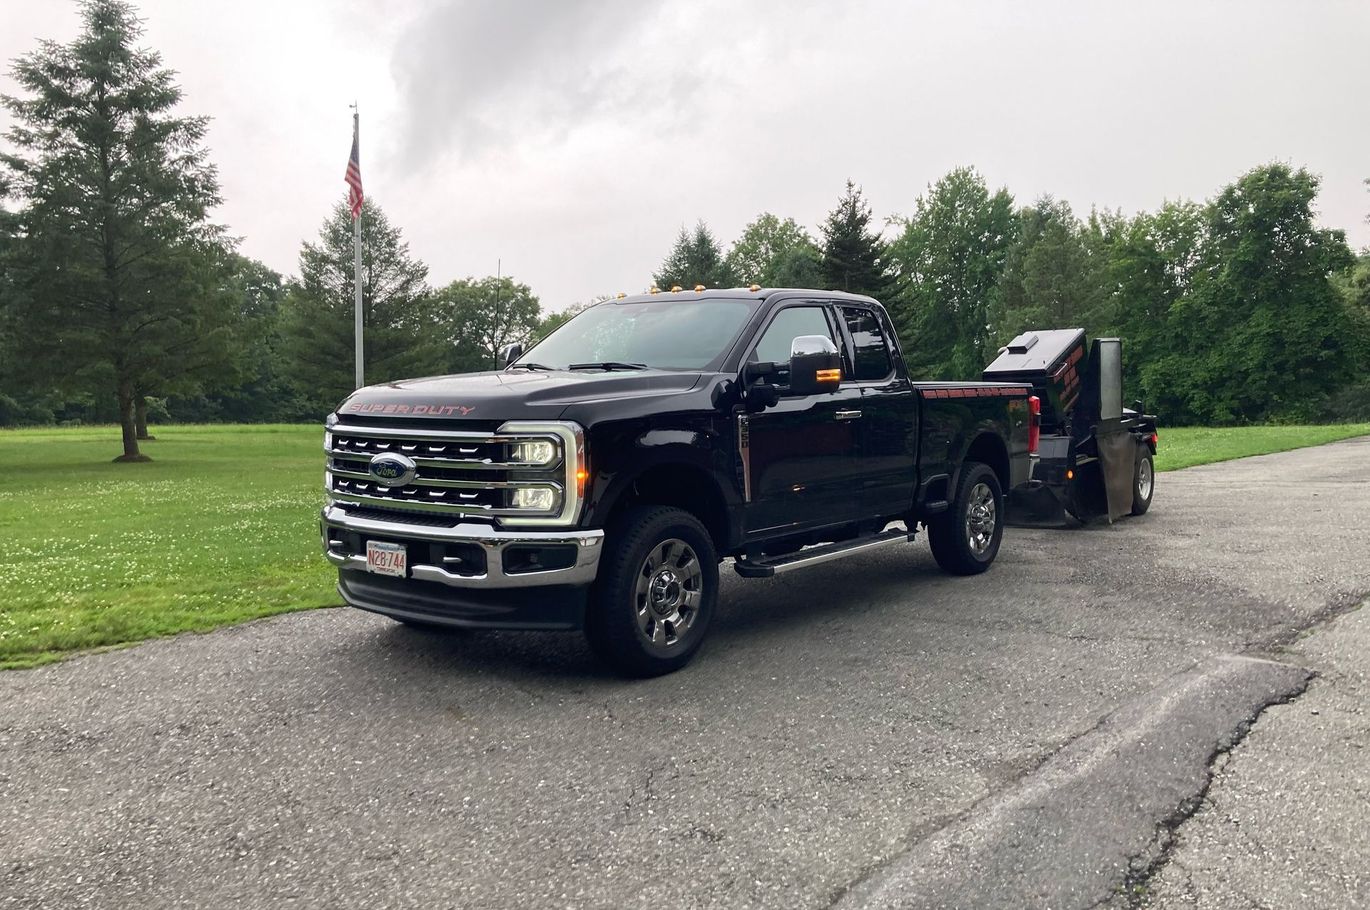 Picture of Business Car and Equipment | Lunenburg, MA | Curtis Stump Grinding Service